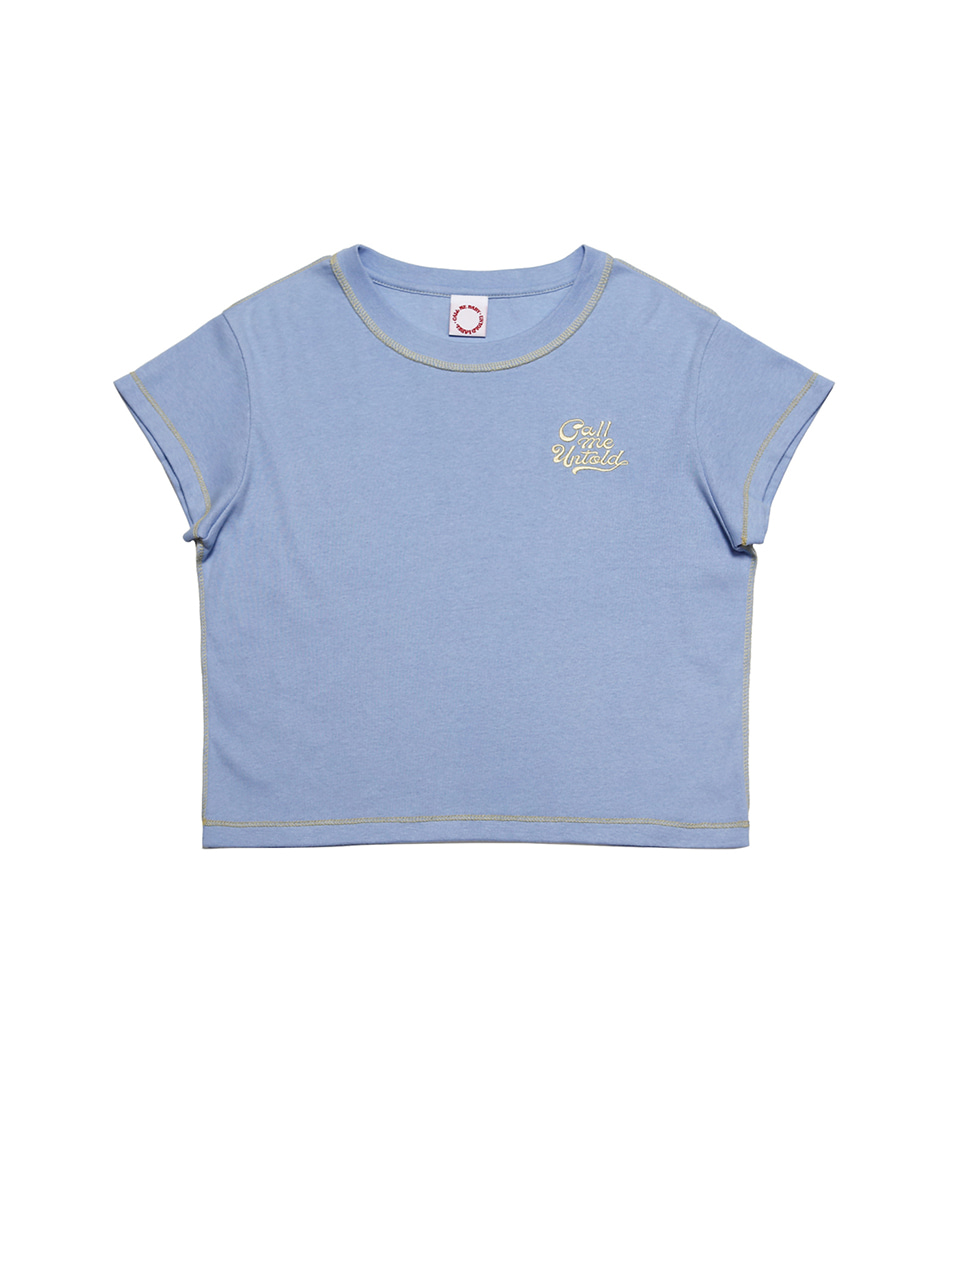 [with Call Me Baby] OVERSTITCH T-SHIRT - BLUE